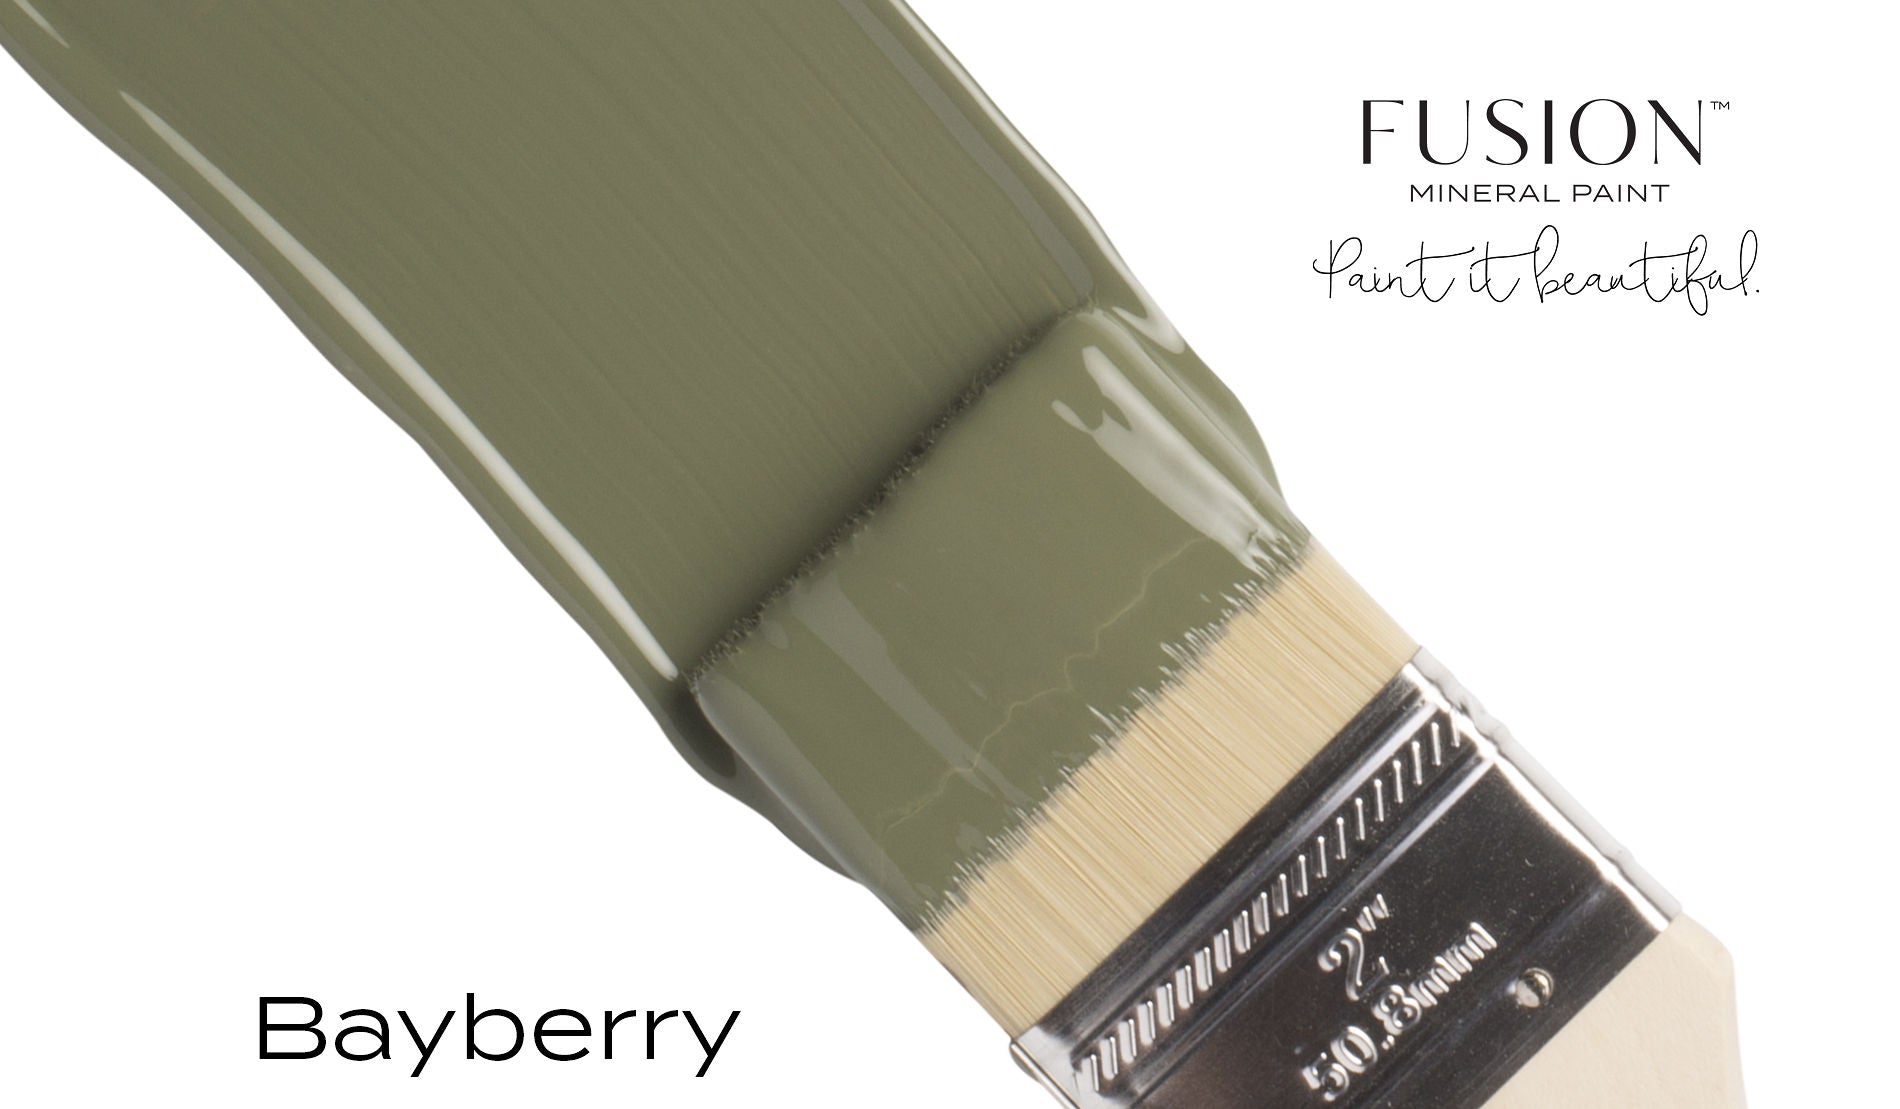 Fusion Mineral Paint Bayberry angled brush